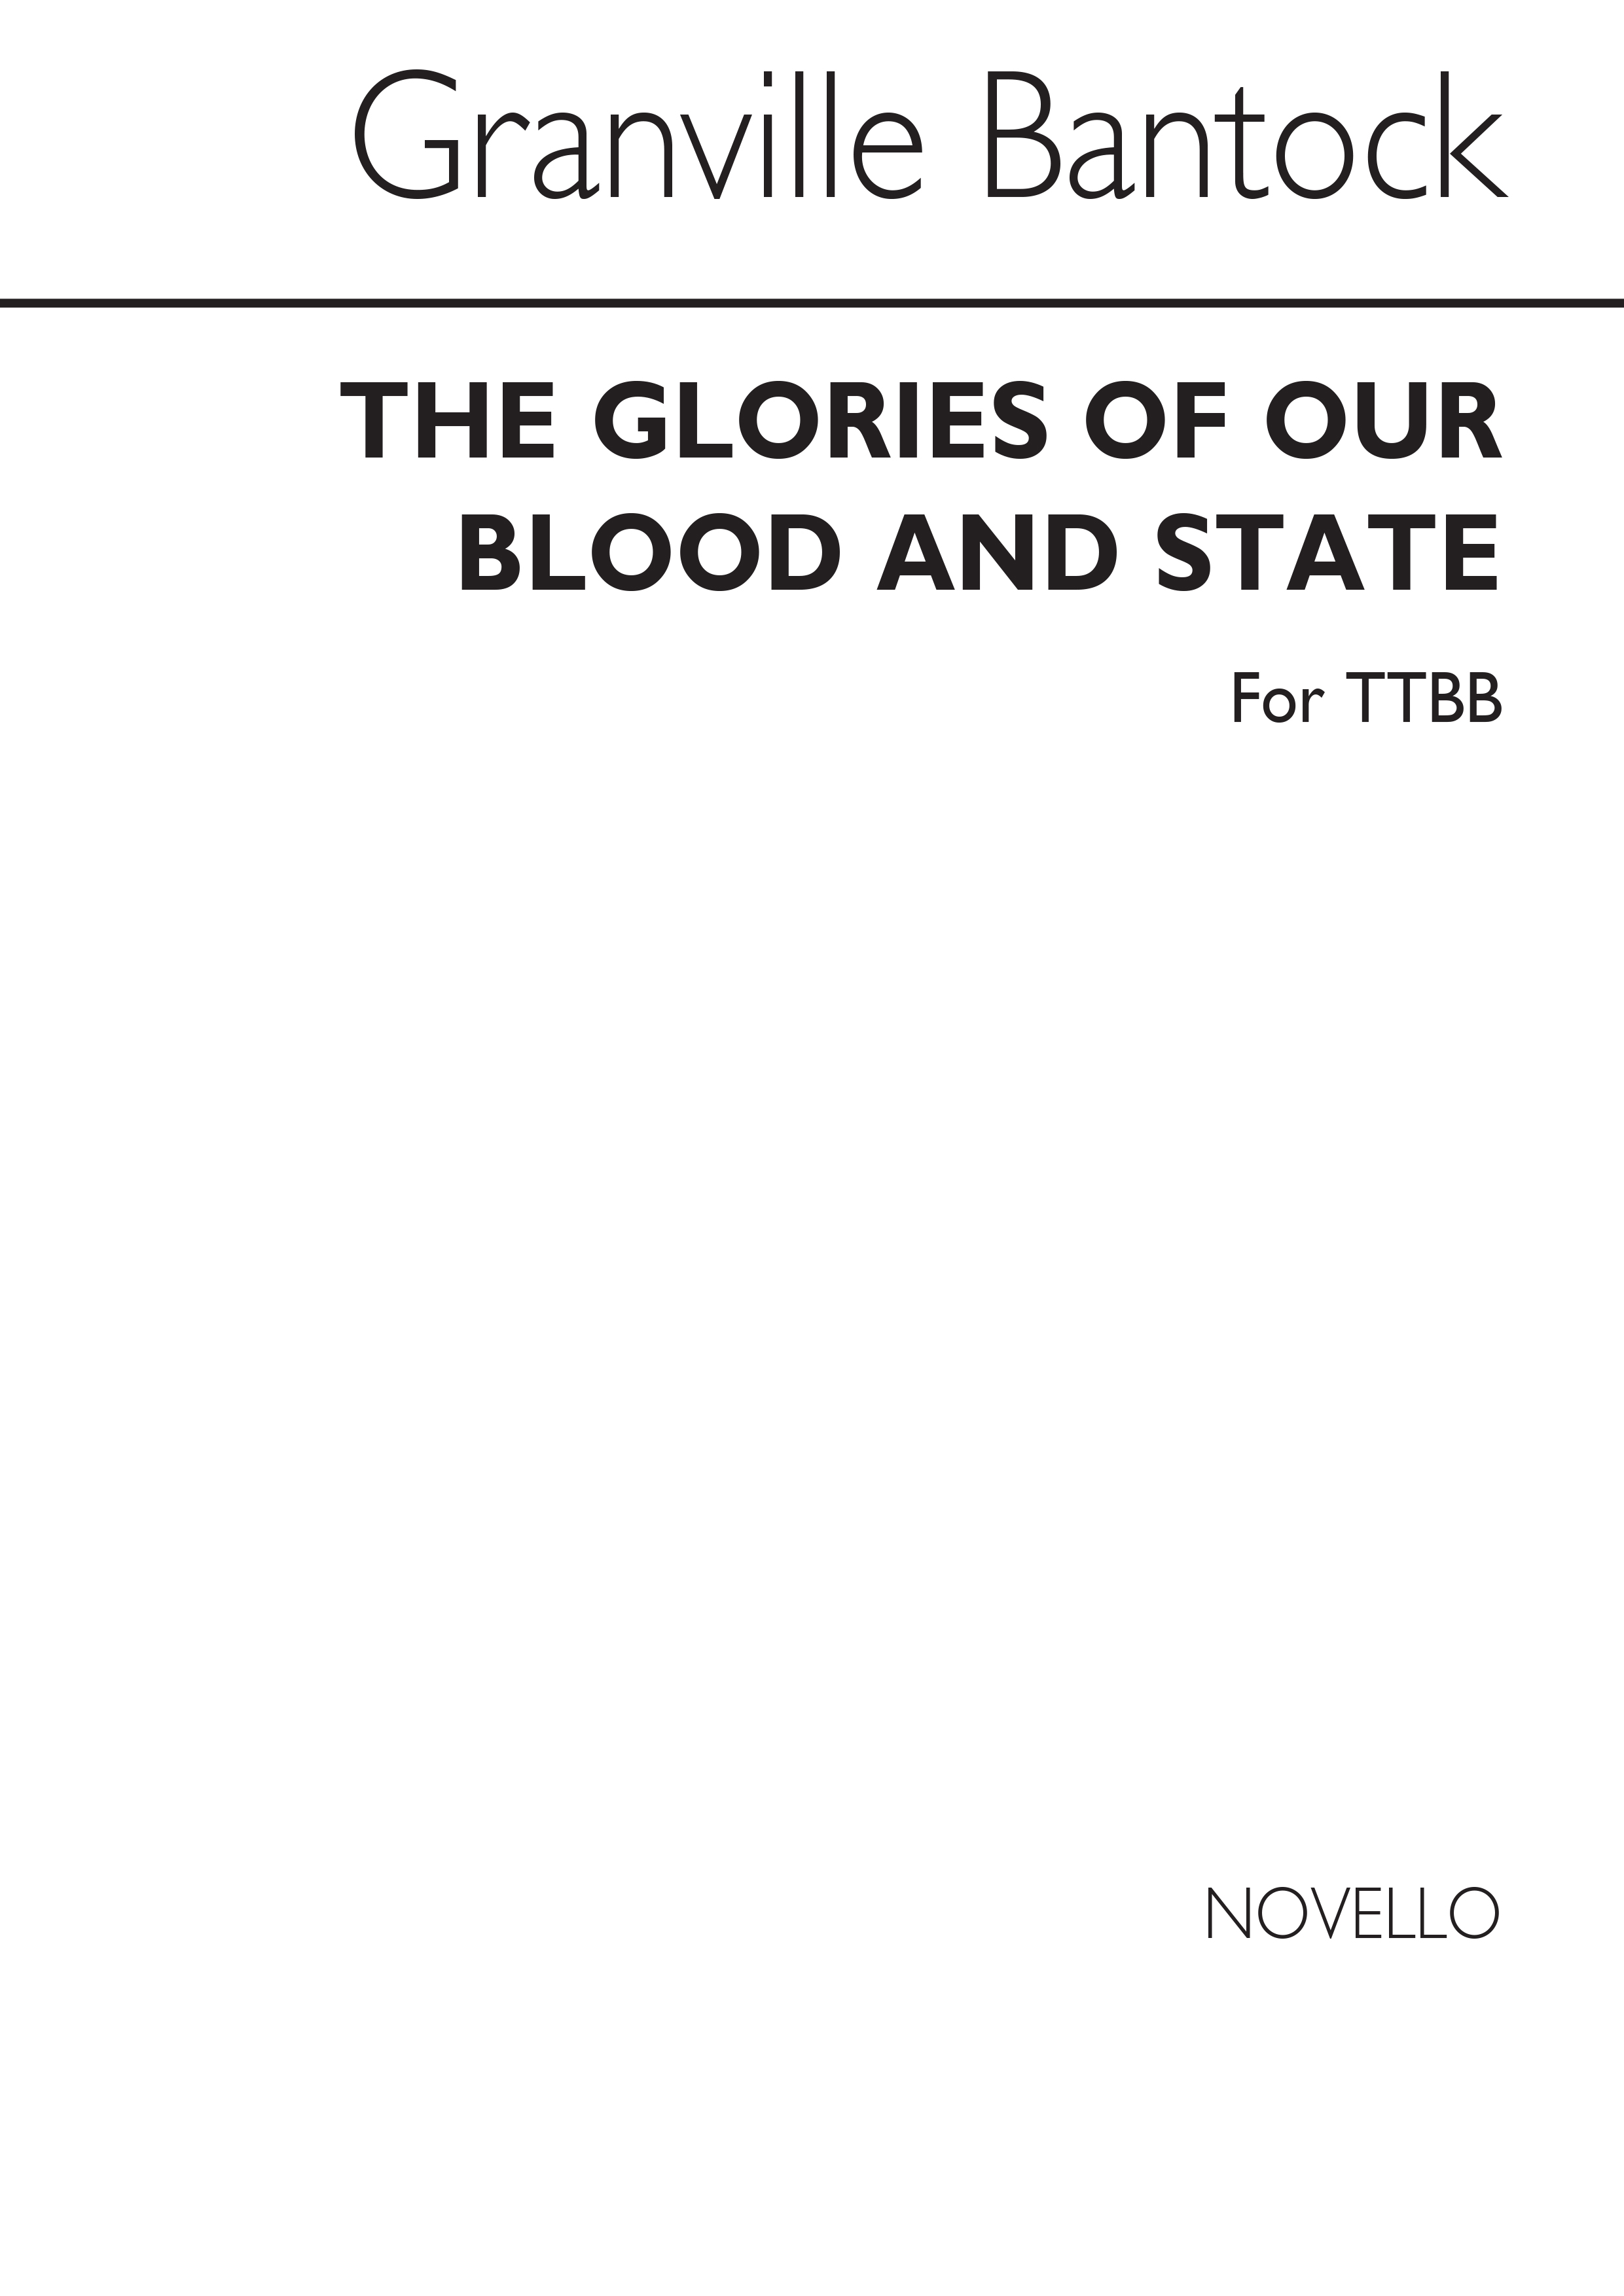 Granville Bantock: The Glories Of Our Blood And State (TTBB)